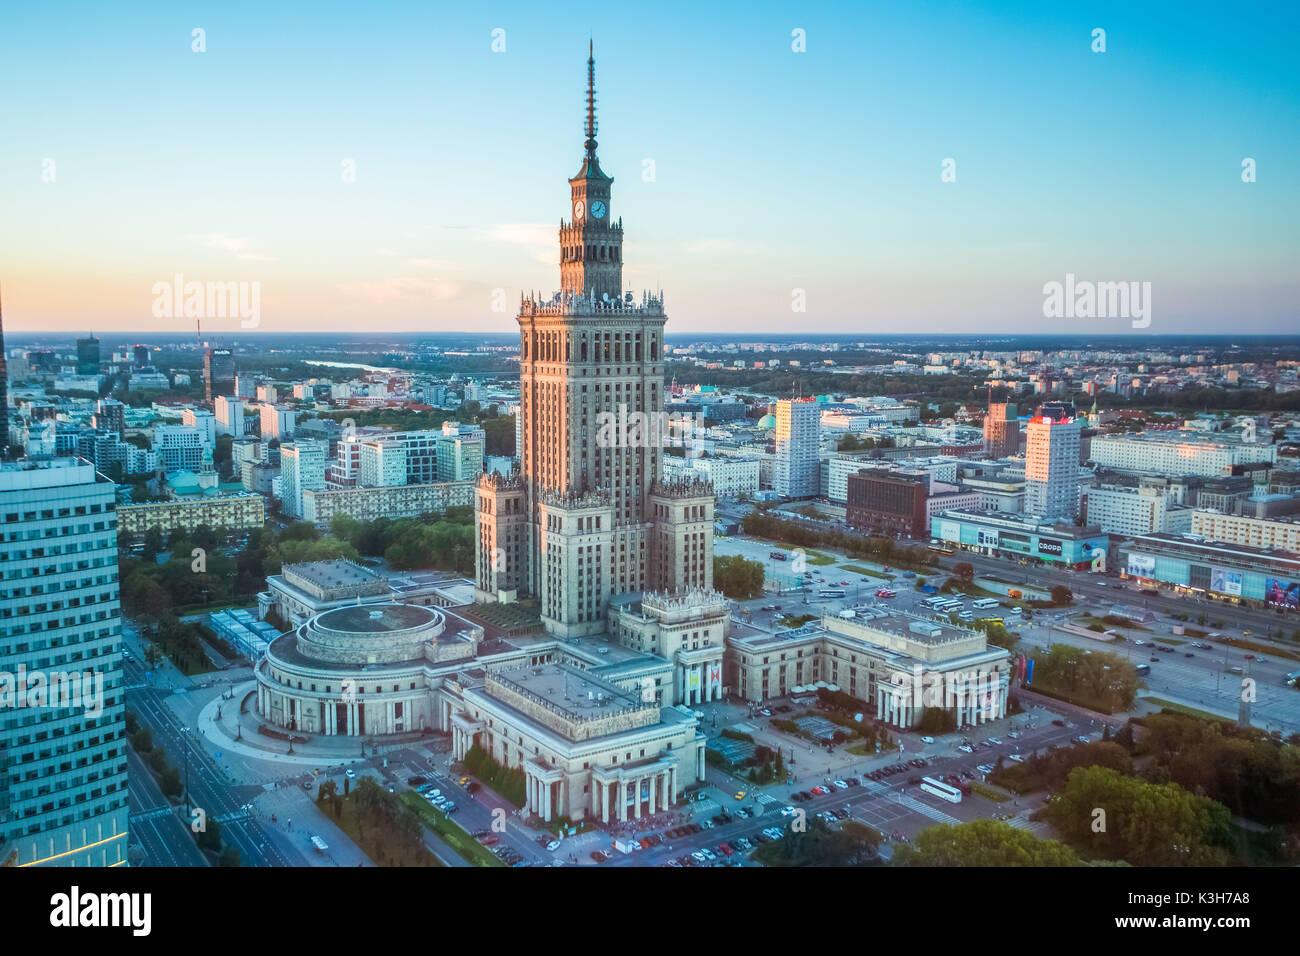 Poland, Warzaw City, Palace of Culture and Science Building Stock Photo